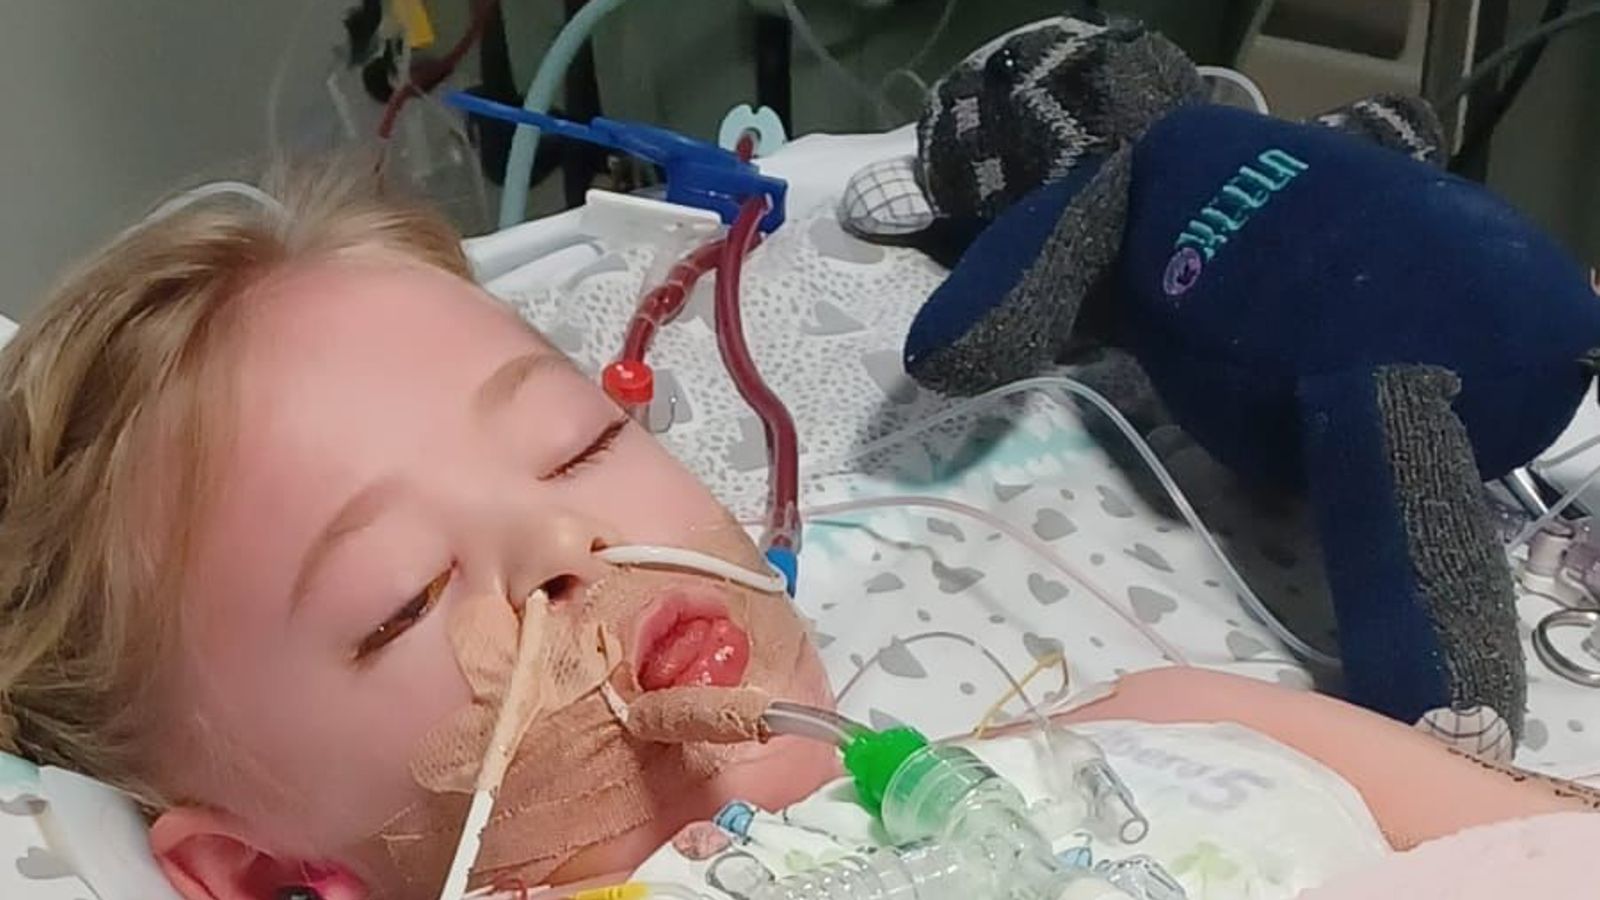 Strep A infection leaves four-year-old girl fighting for her life in Liverpool hospital